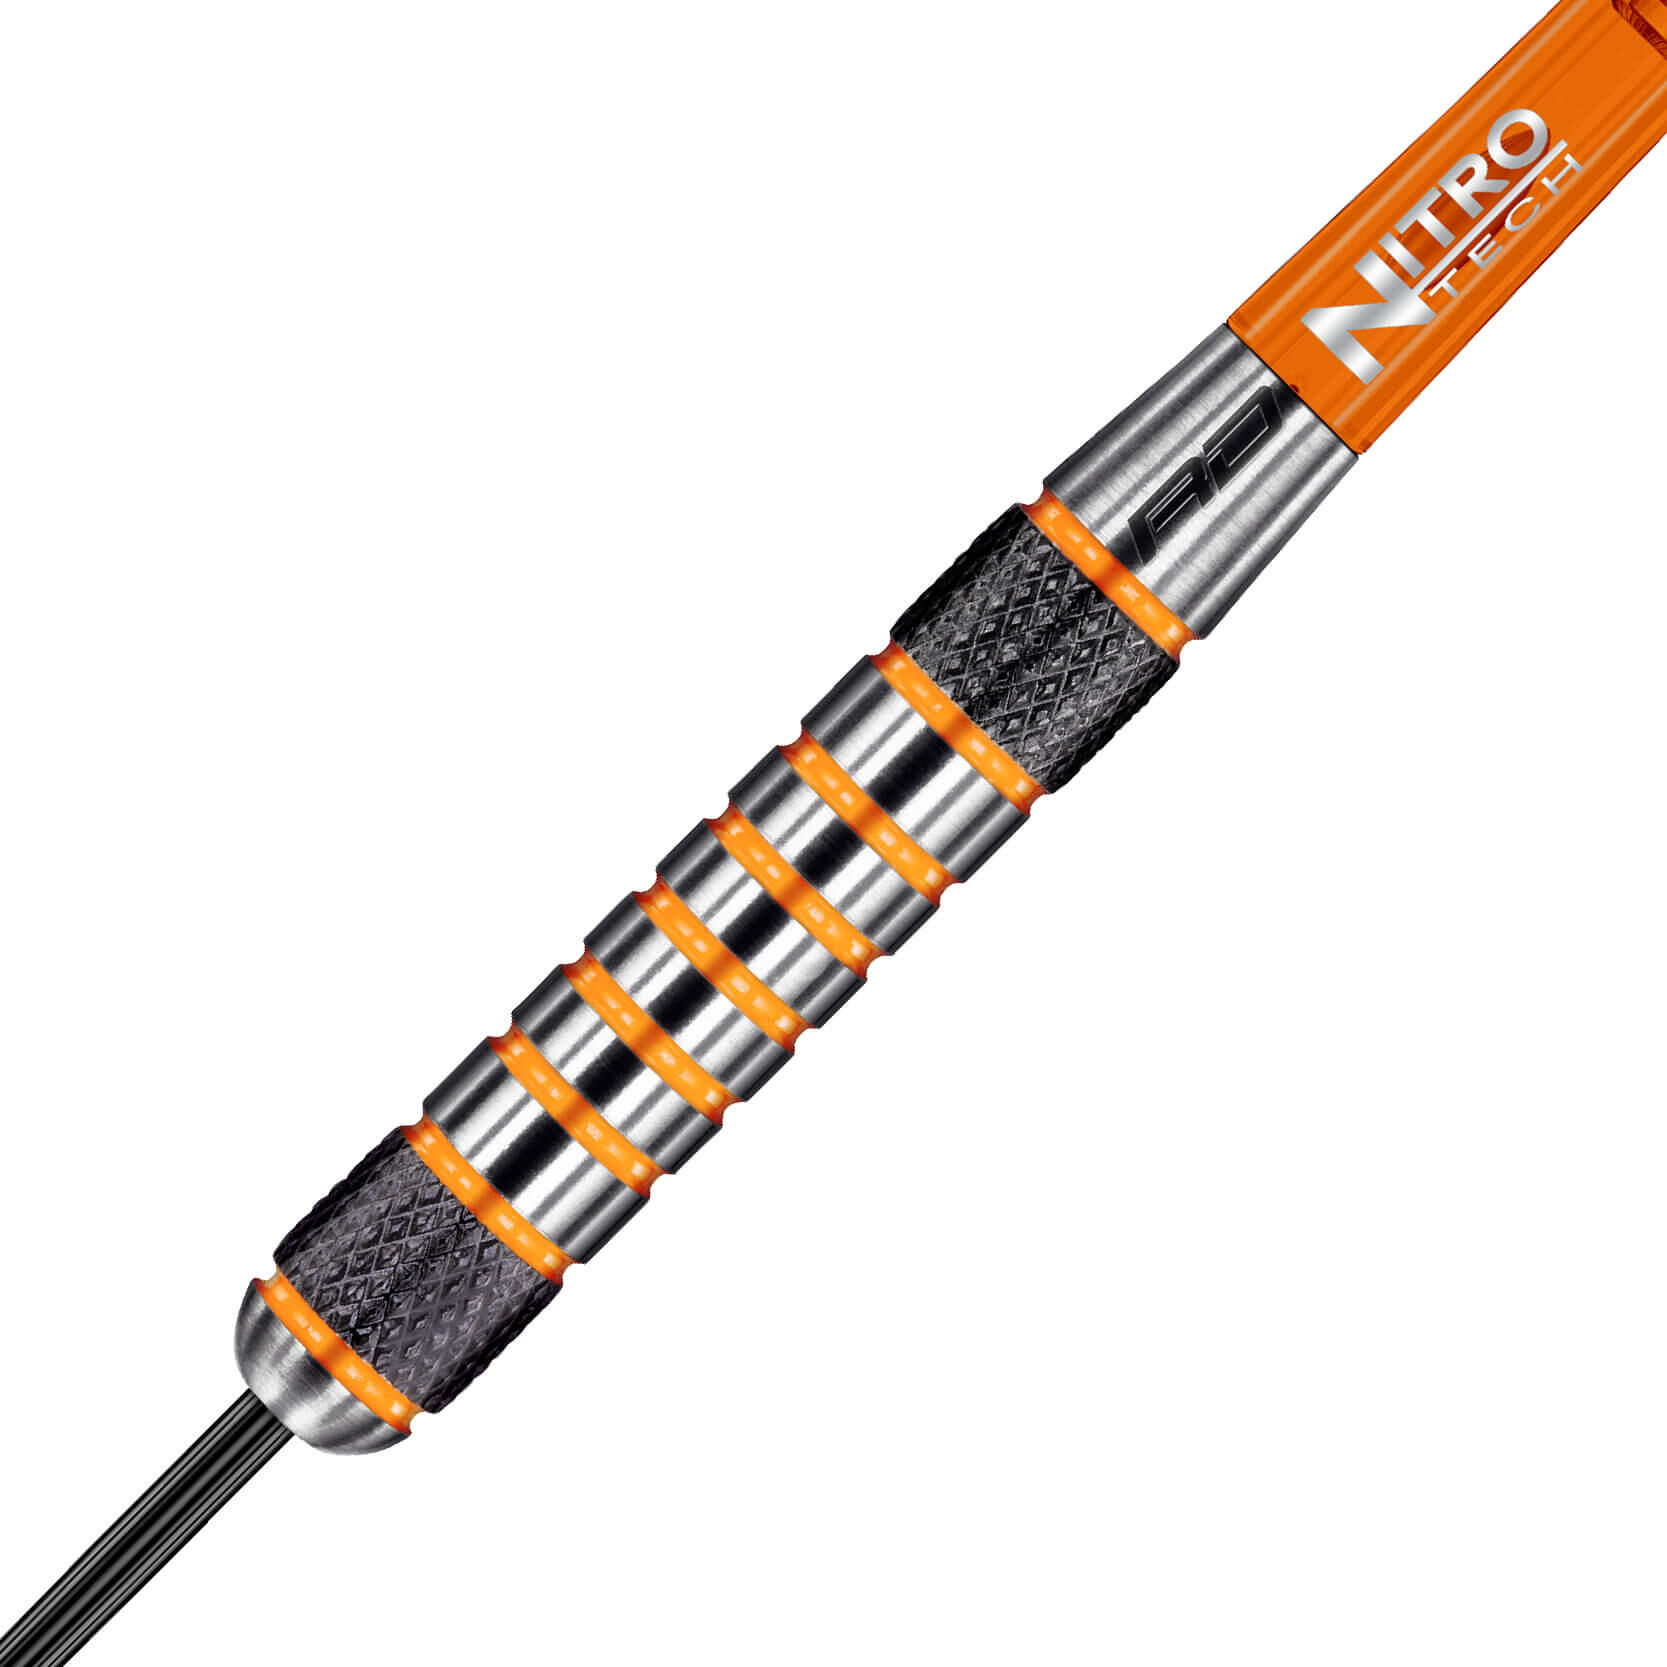 Amberjack 7: 26g Tungsten Darts Set with Flights and Stems 3/5